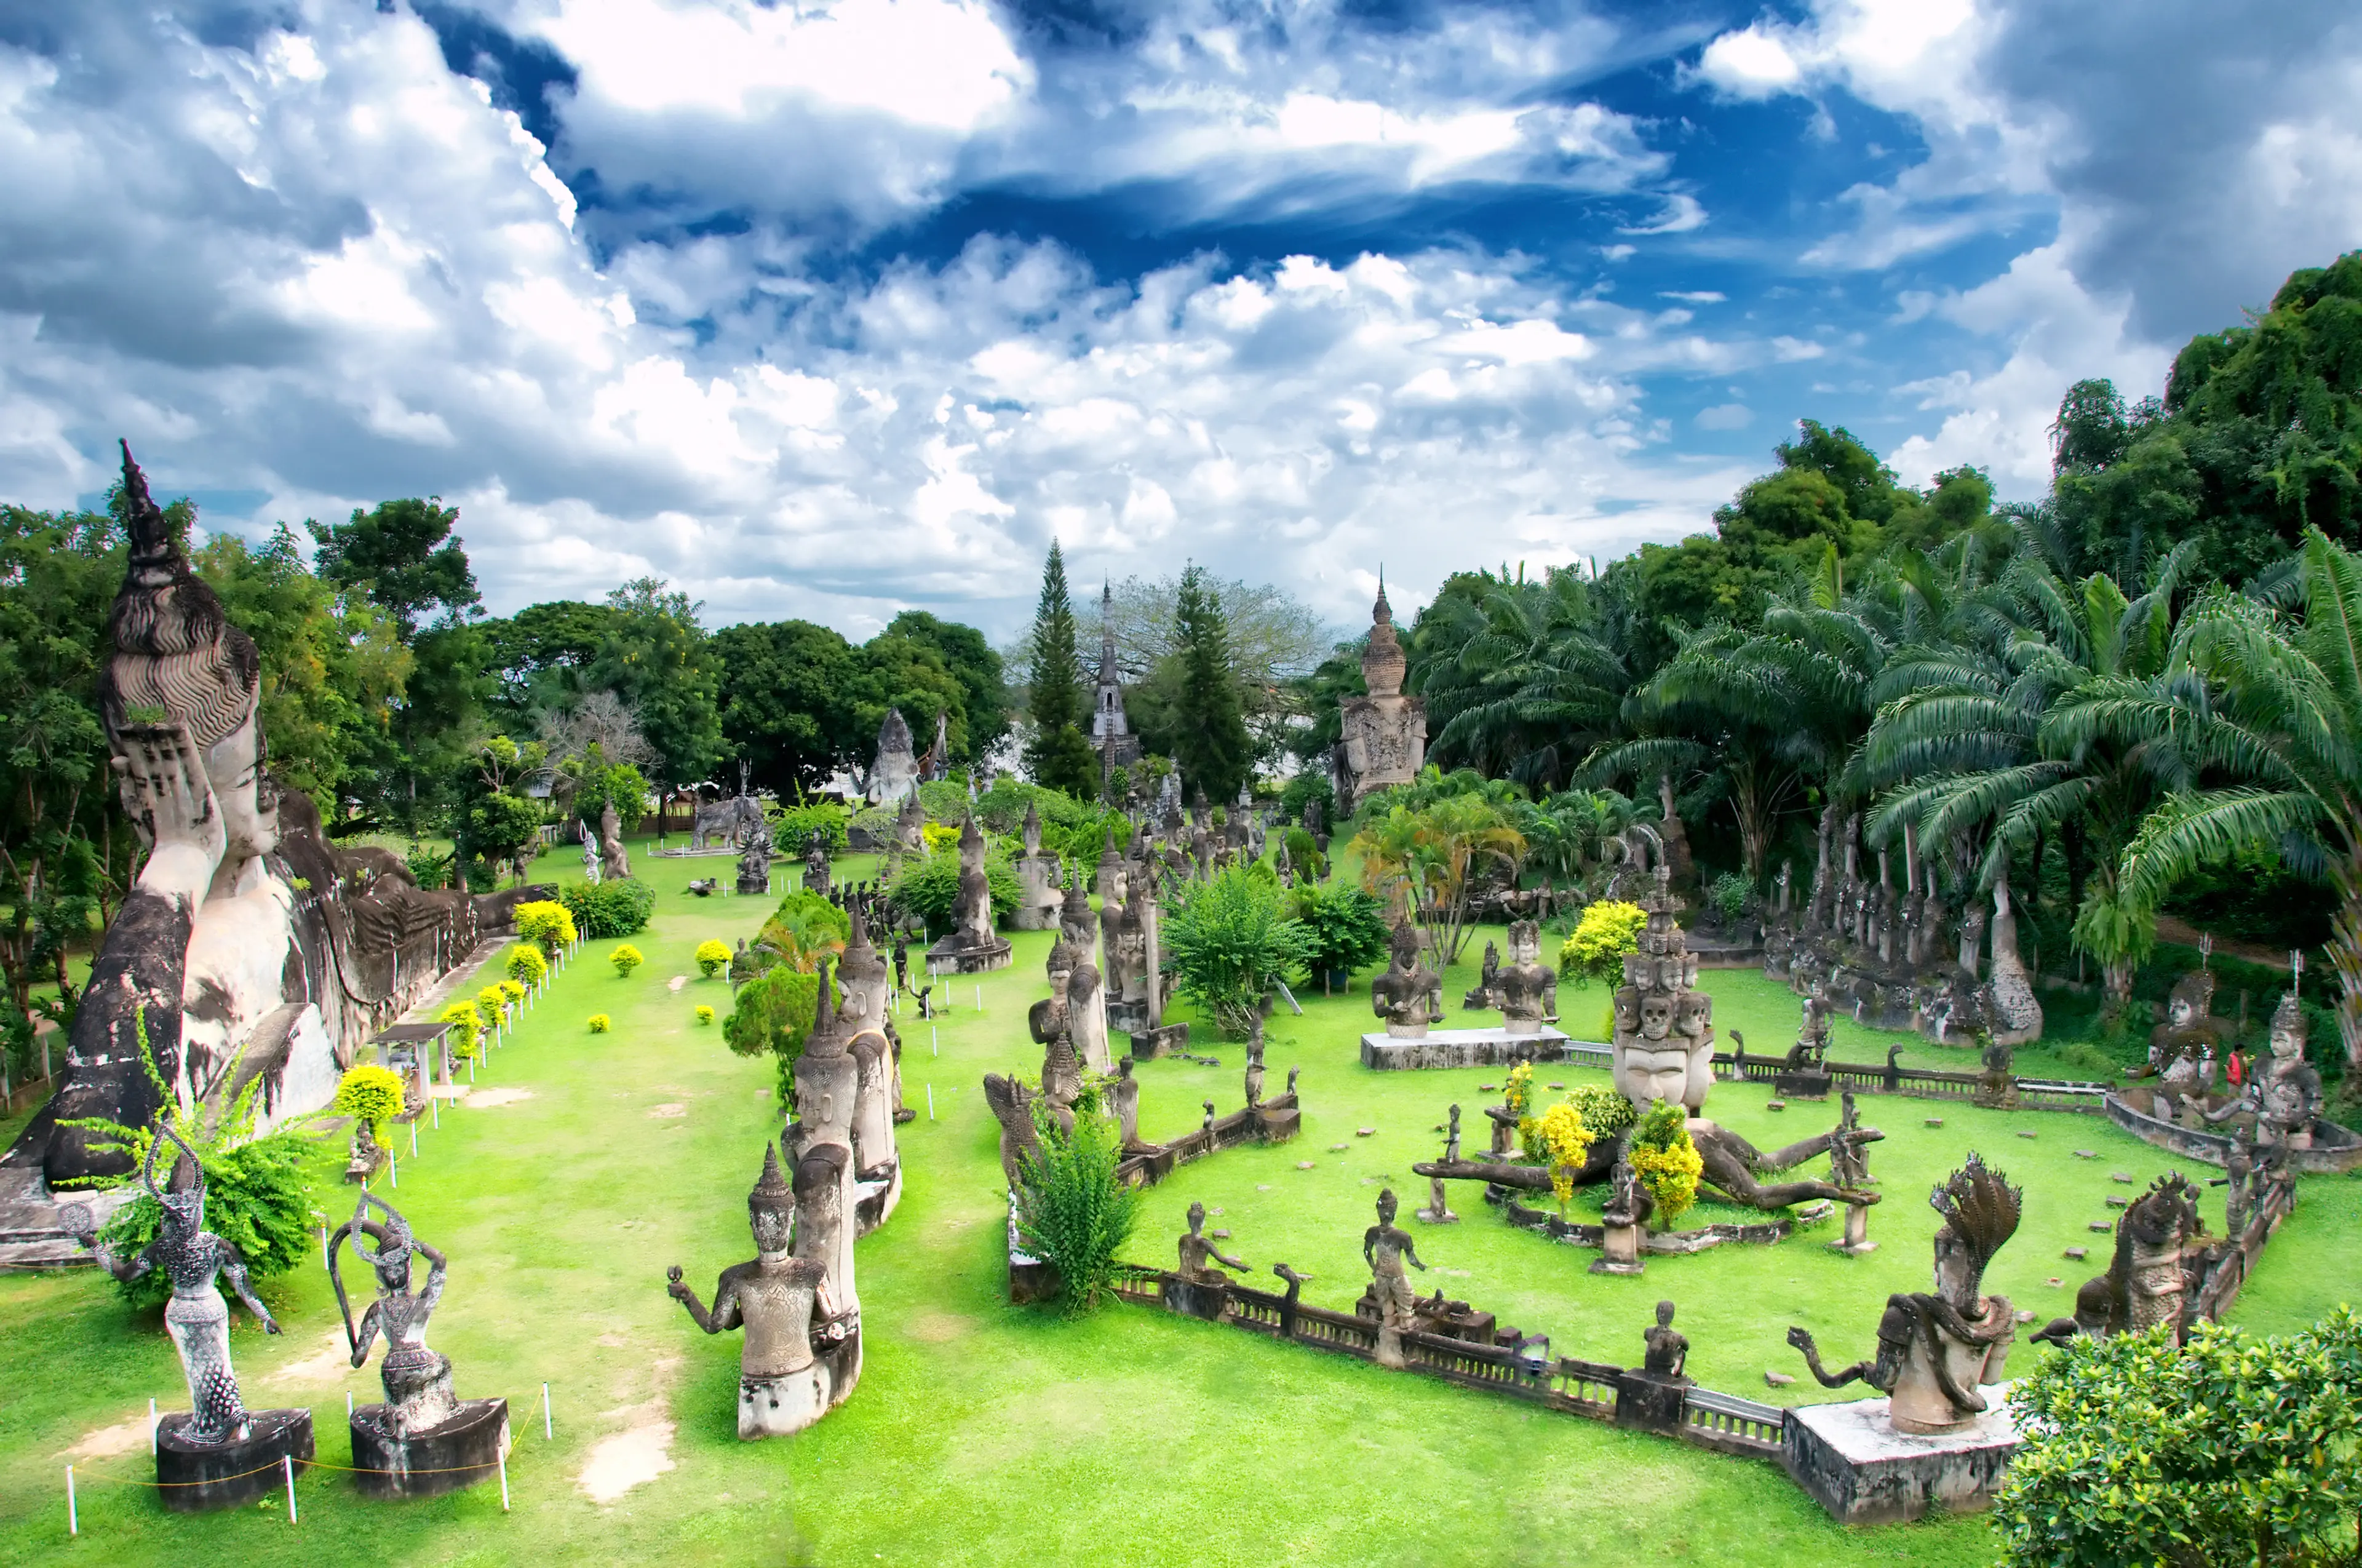 2-Day Romantic Food and Wine Relaxation Journey in Laos